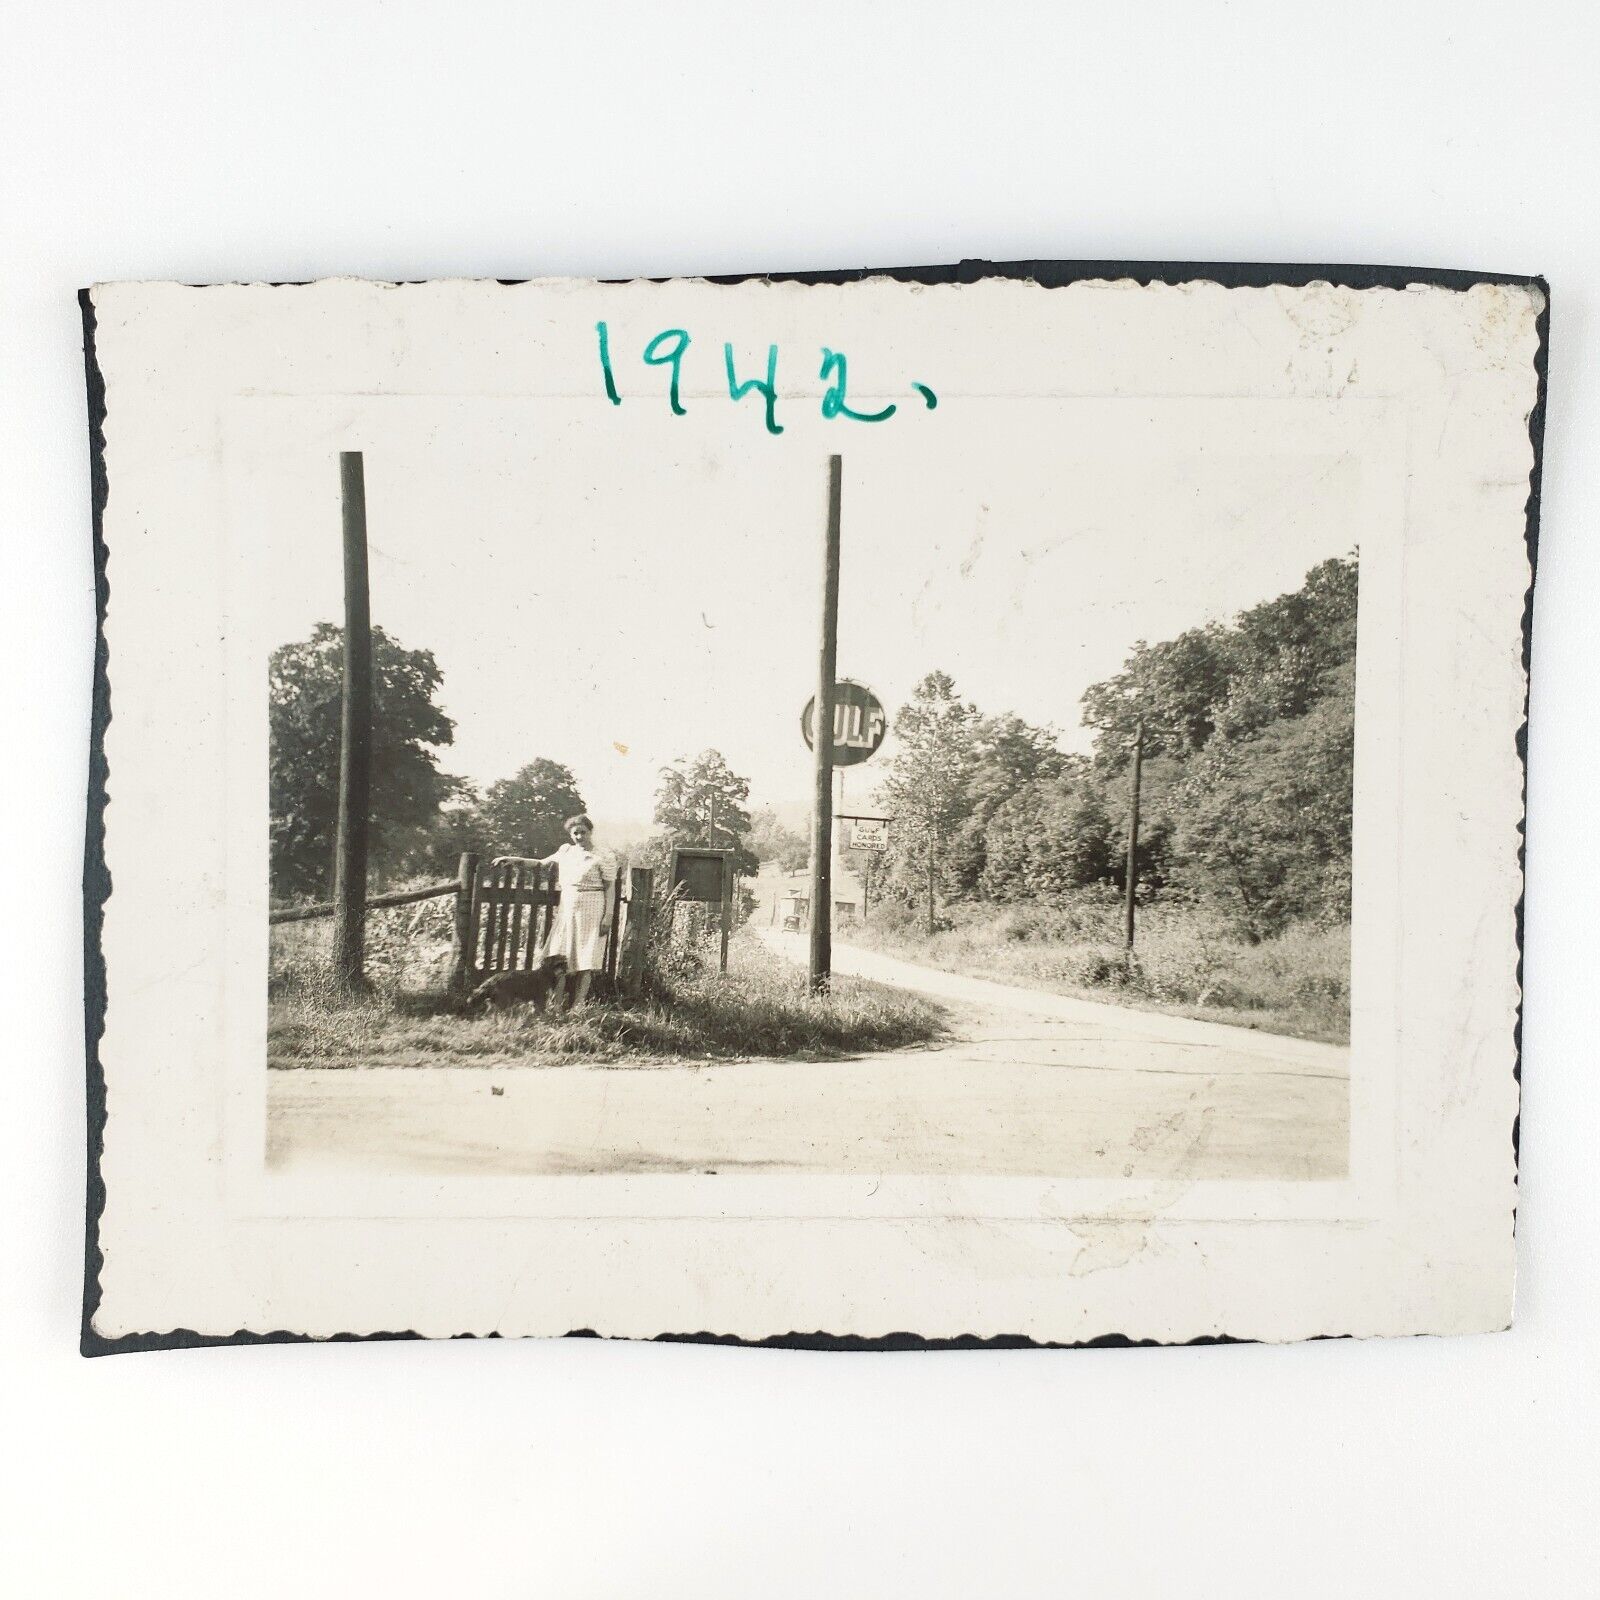 Gulf Oil Gas Station Photo 1920s Antique Road Service Woman Lady Snapshot D1727